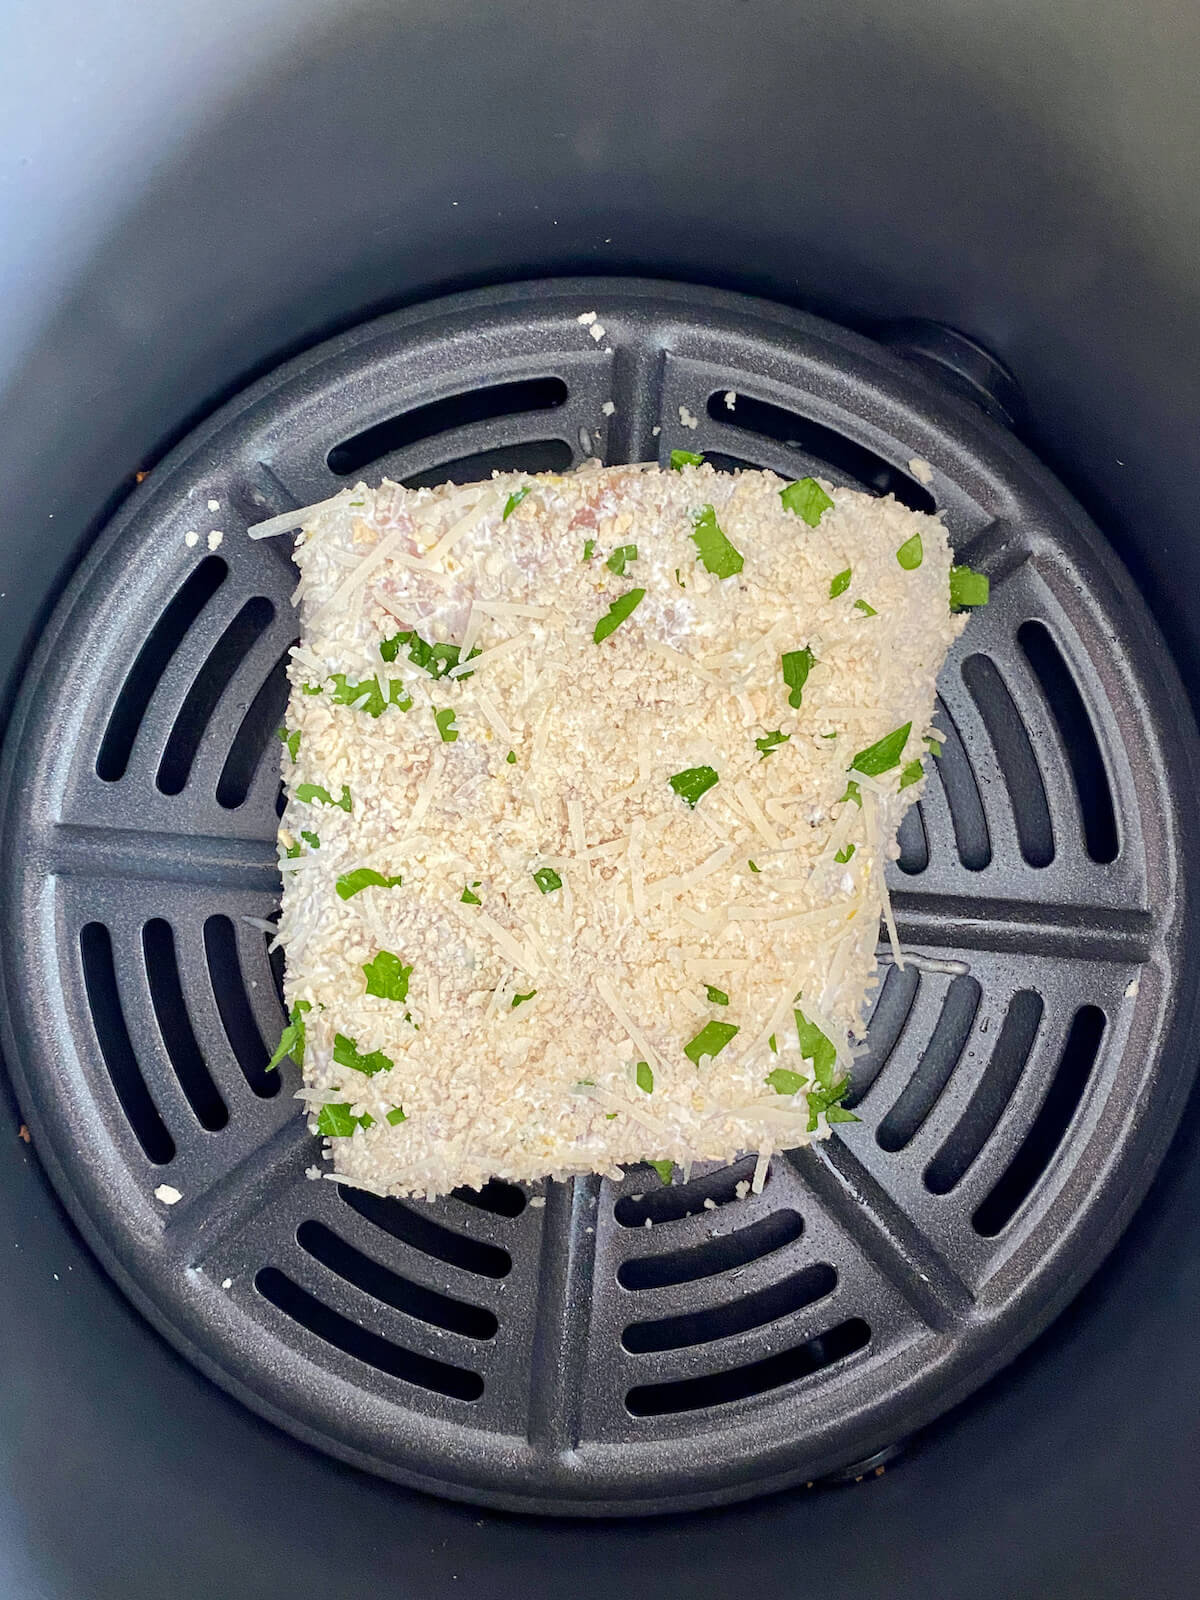 The parmesan-crusted halibut in the basket of an air fryer before being cooked.